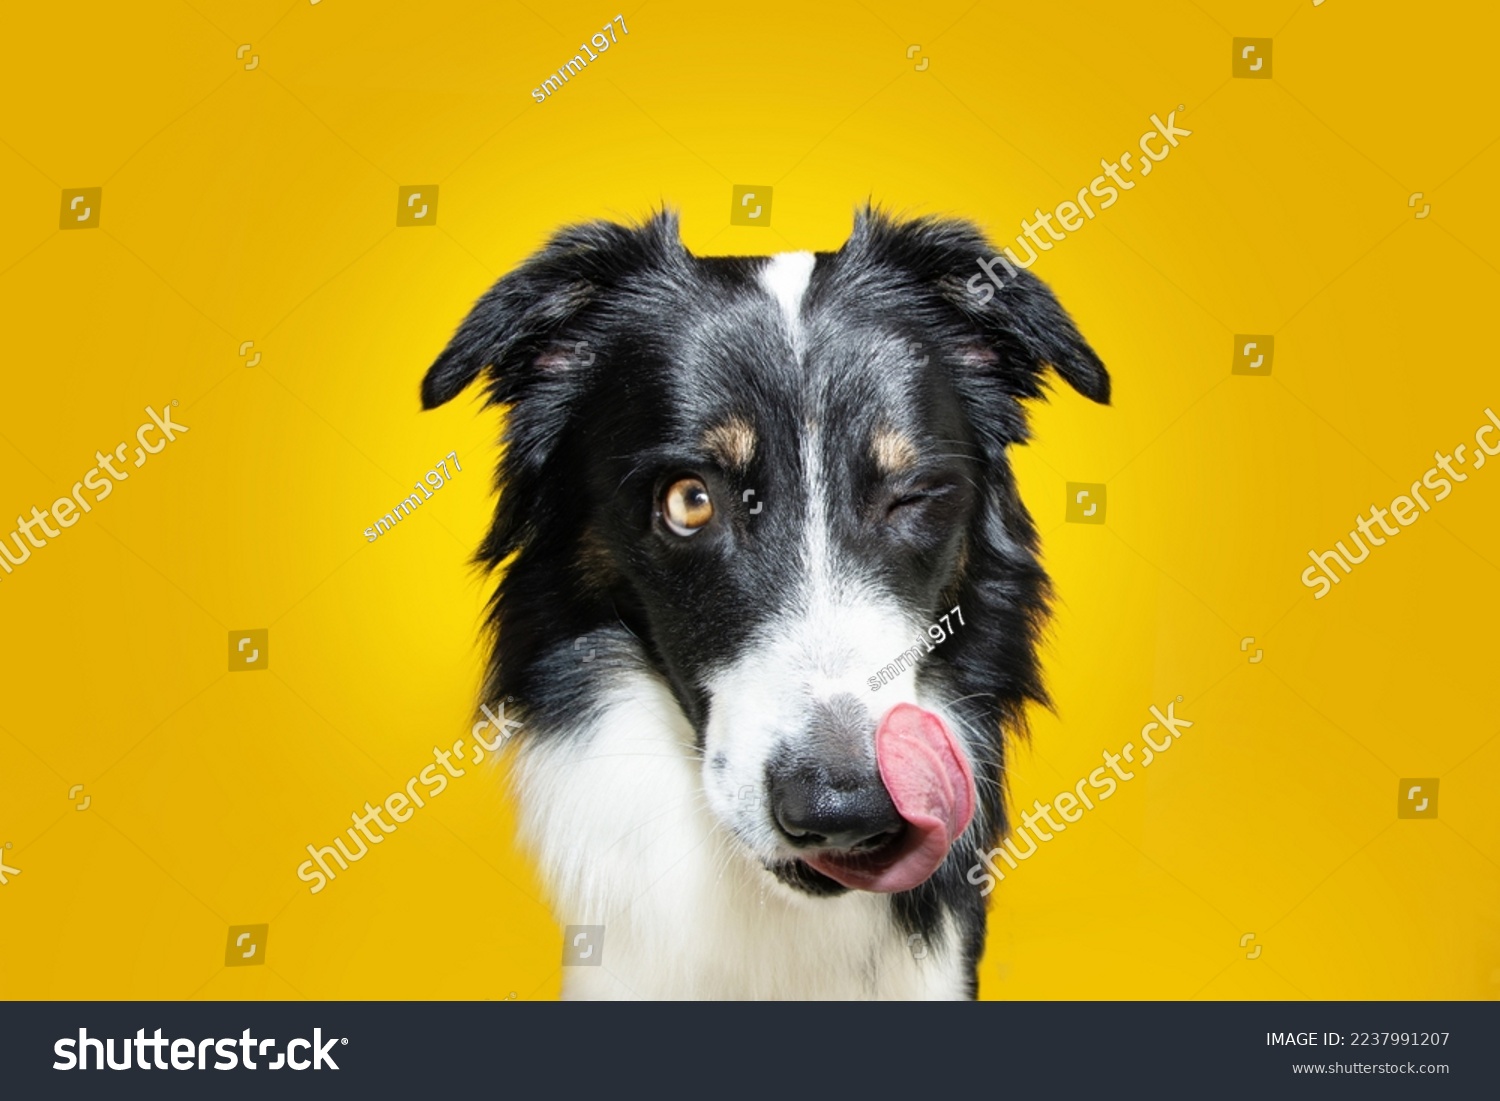 Hungry border collie dog linking it nose with tongue and eating. Isolated on yellow colored background #2237991207